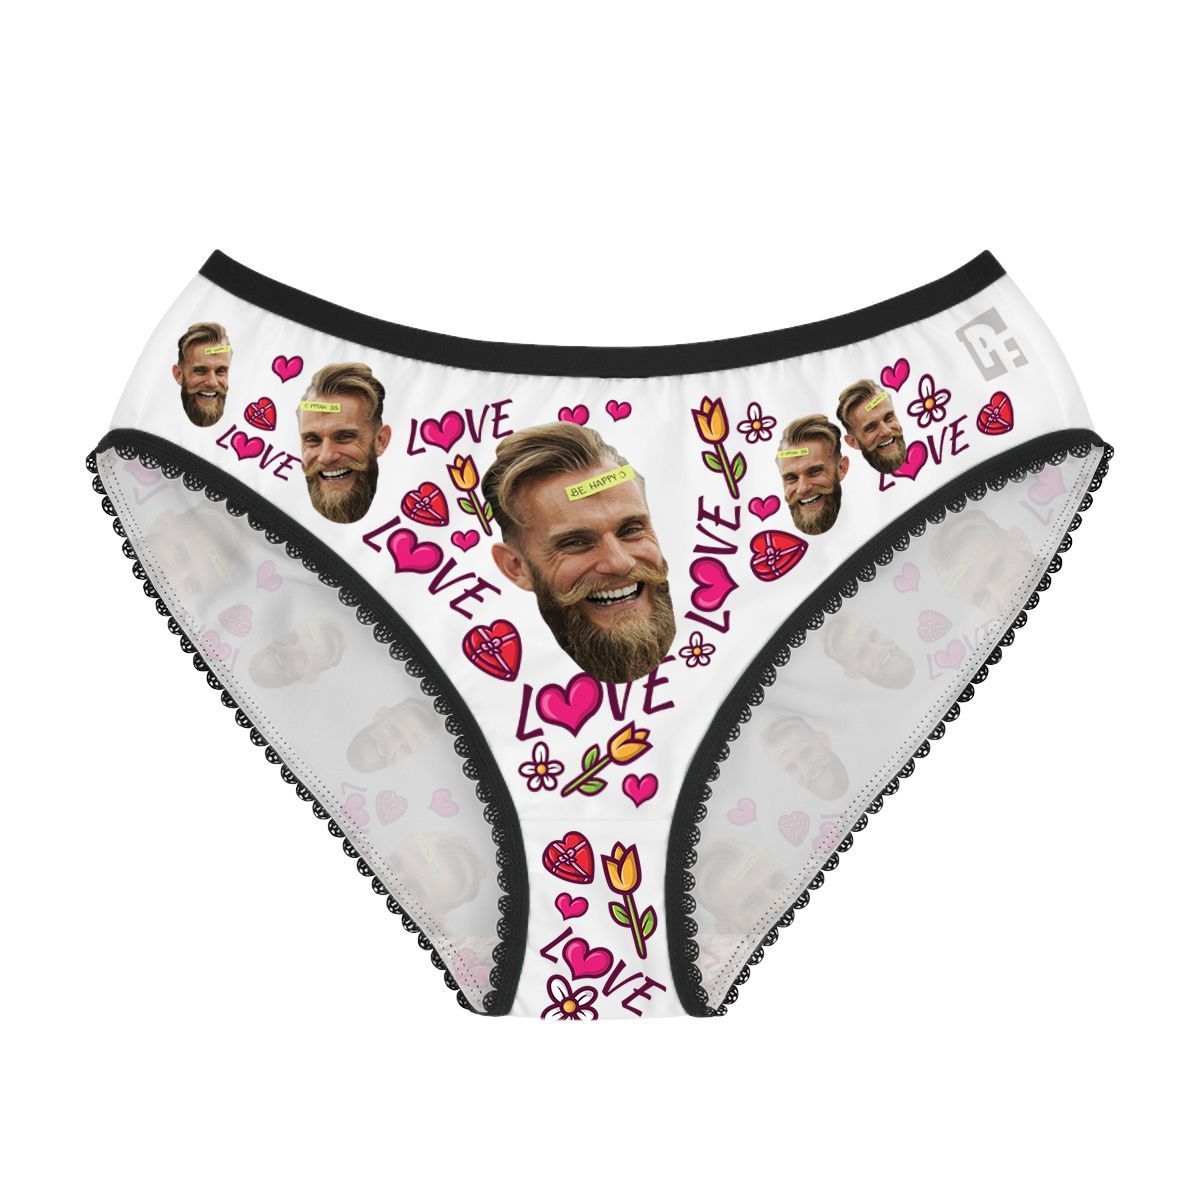 White Hearts and Flowers women's underwear briefs personalized with photo printed on them